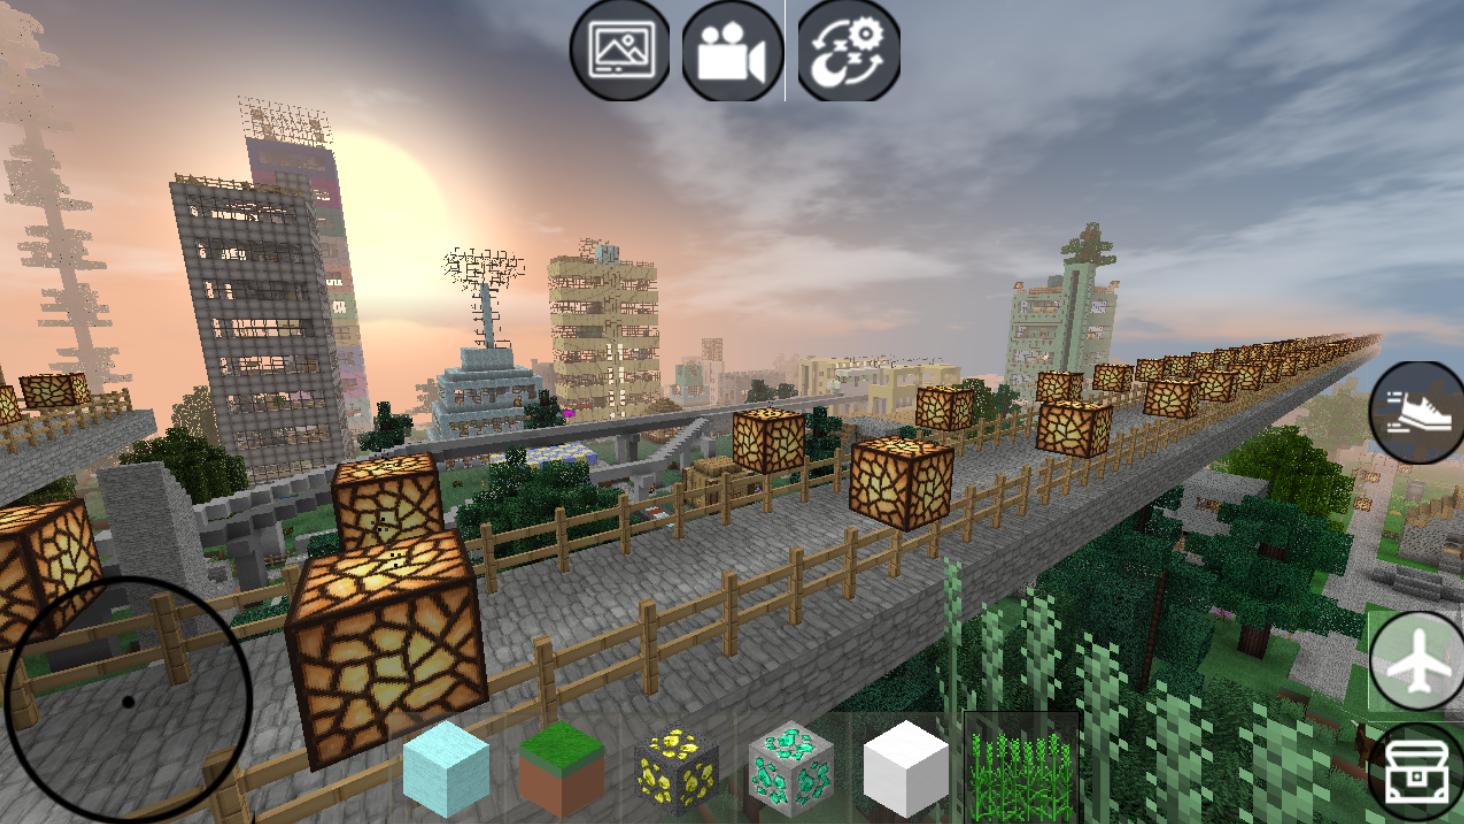 Minicraft : Build Block Craft 2020 for Android - APK Download